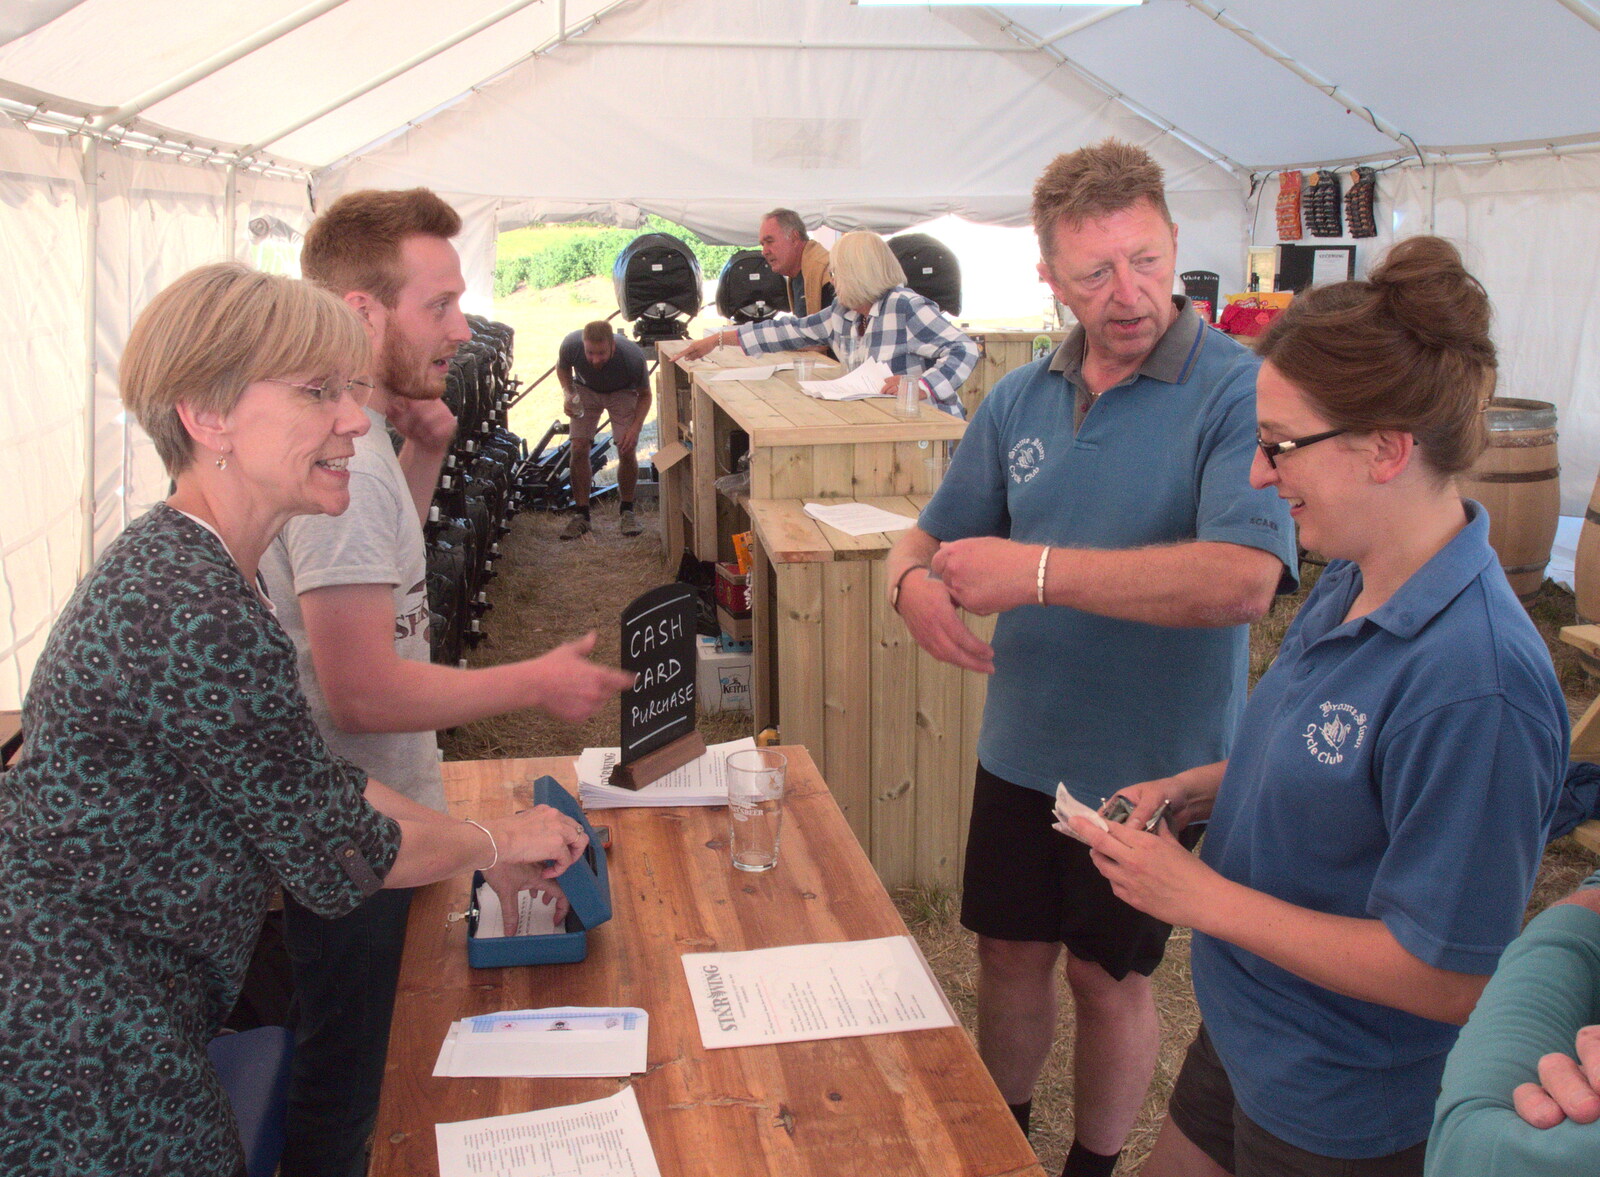 Gaz and Suey are at the bar from The BSCC Rides to Star Wing Beer Festival, Redgrave, Suffolk - 12th July 2018